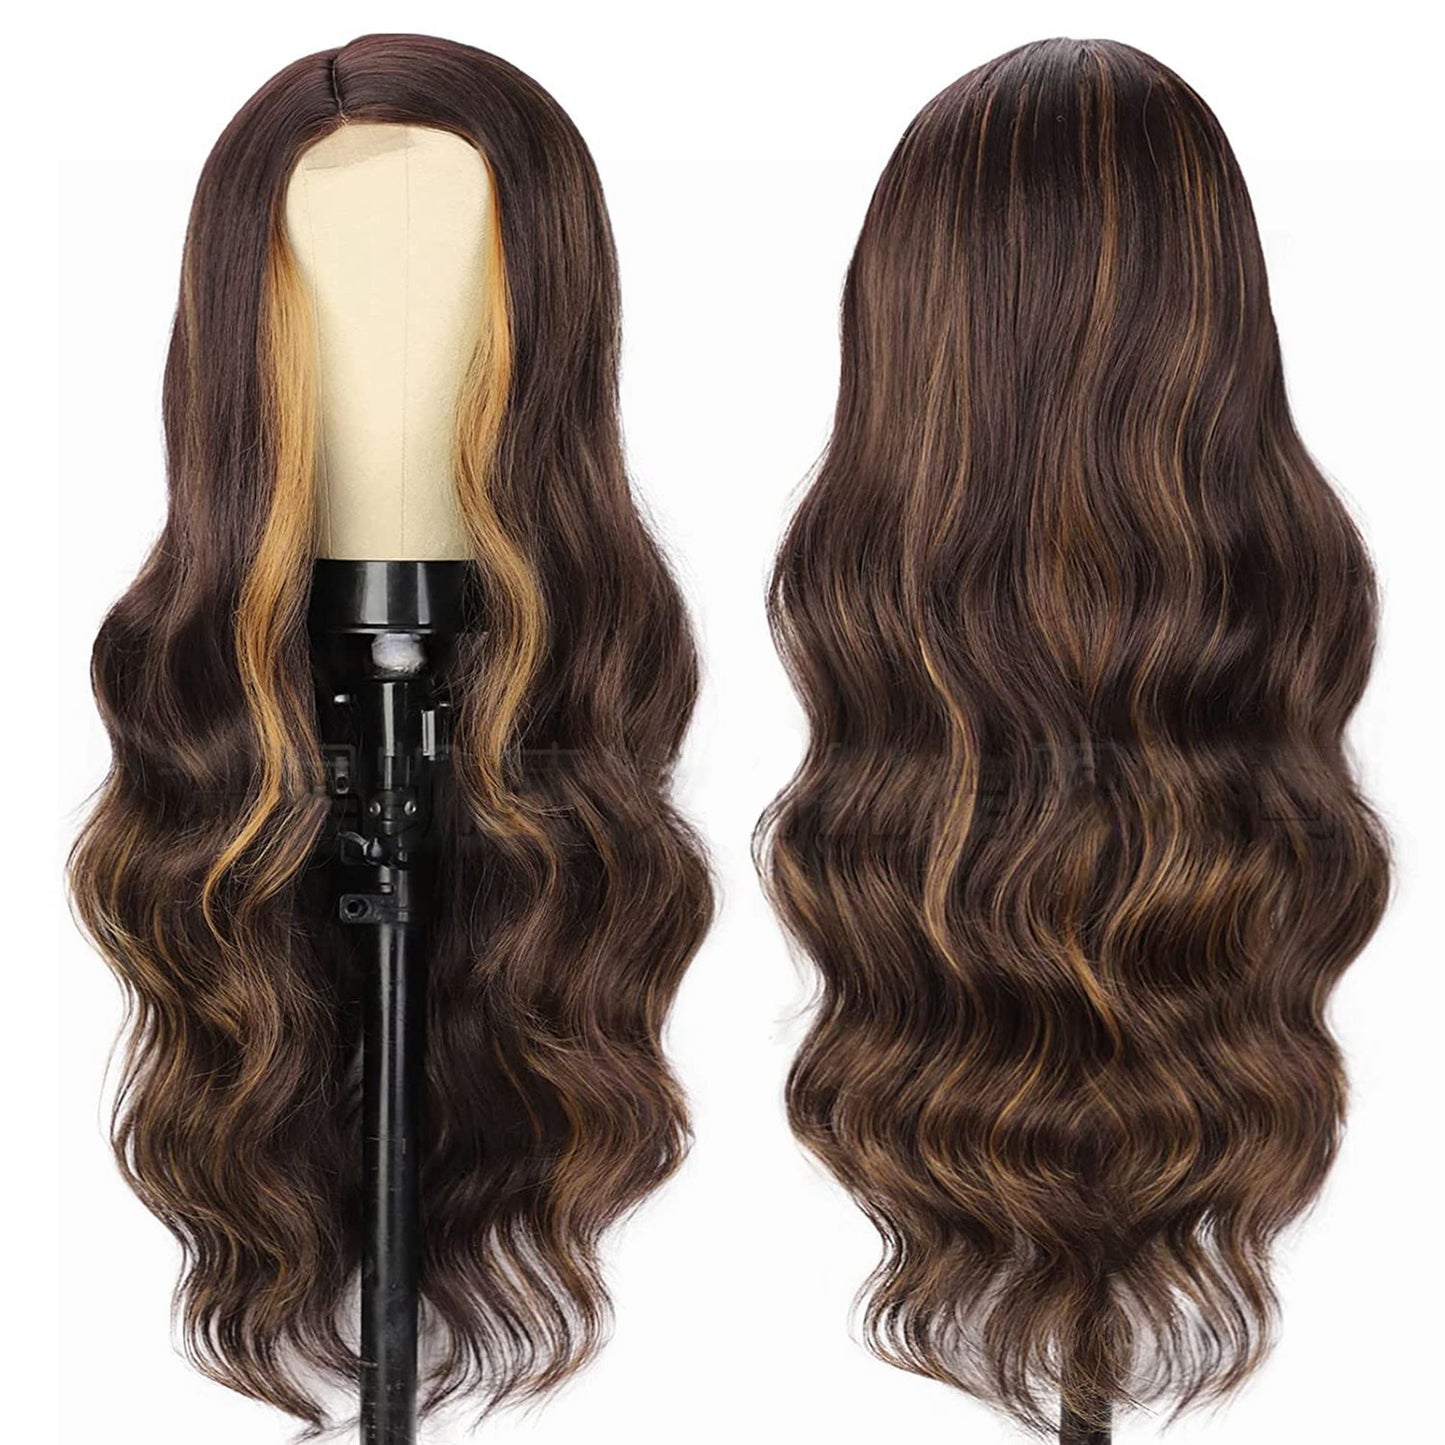 European and American Wigs With Long Curly Hair, Women's Front Lace Wigs, High-Temperature Silk Wigs, and Headsets